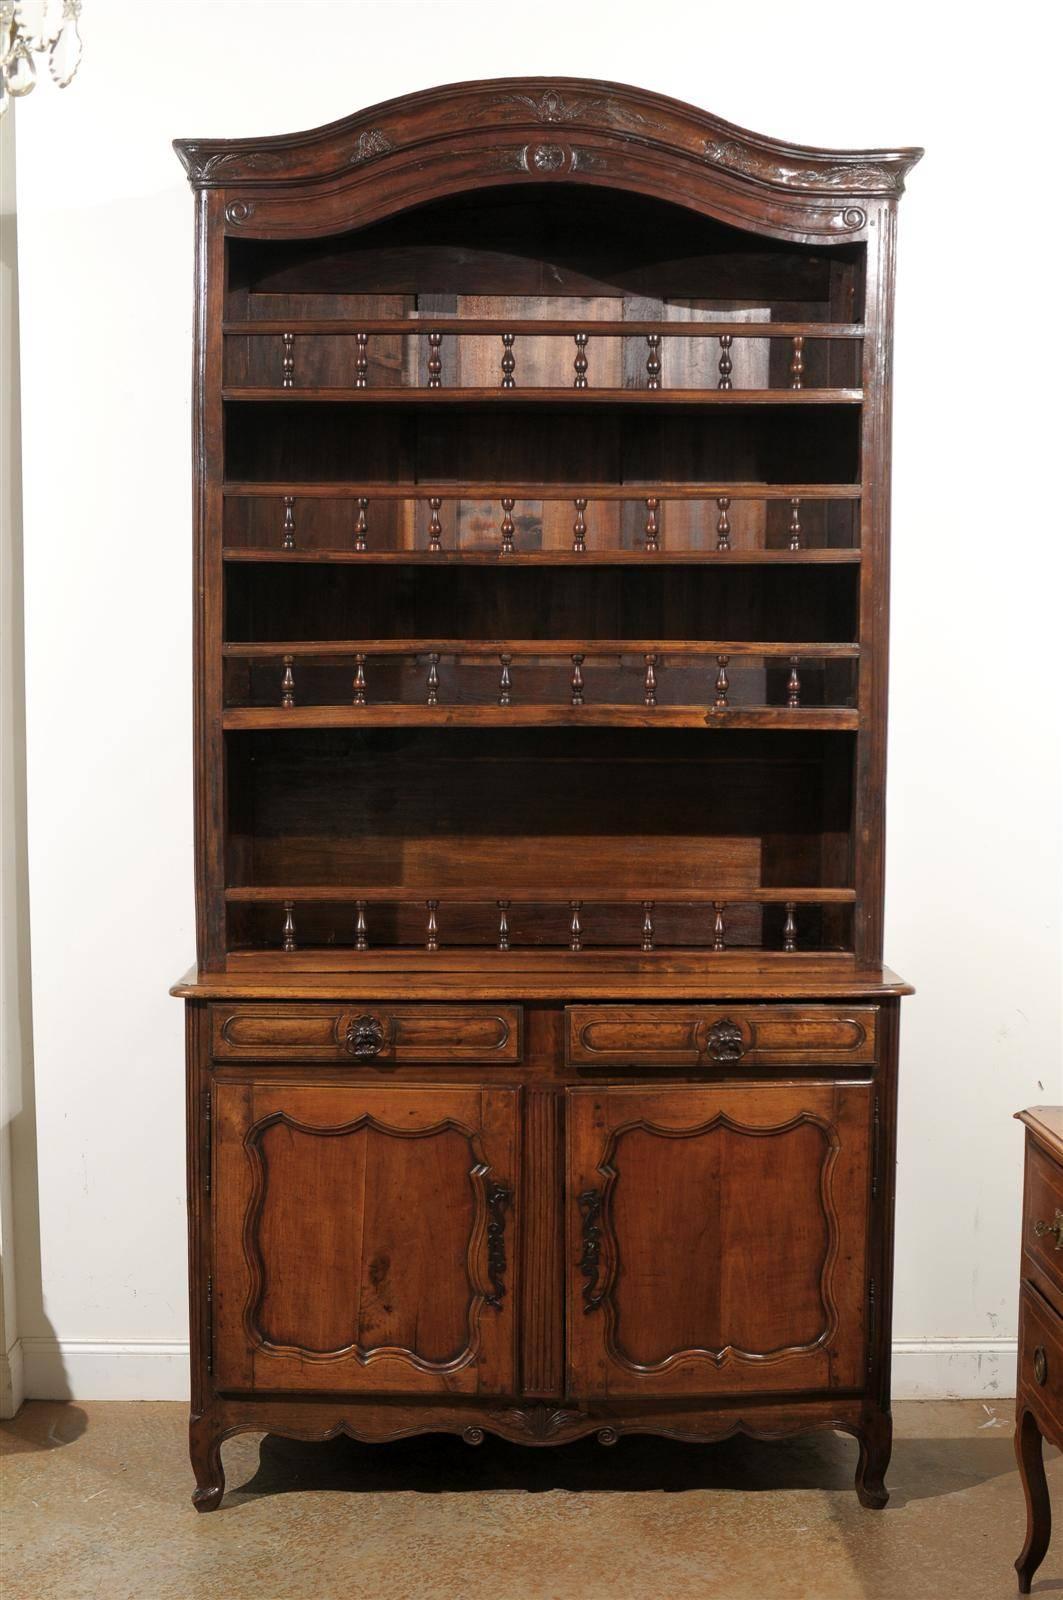 A French late 18th century Louis XV style cherry two-part vaisselier with original hardware and open shelves over two drawers and two doors. This French buffet à deux-corps features a bonnet-shaped pediment carved with delicate foliage motifs,